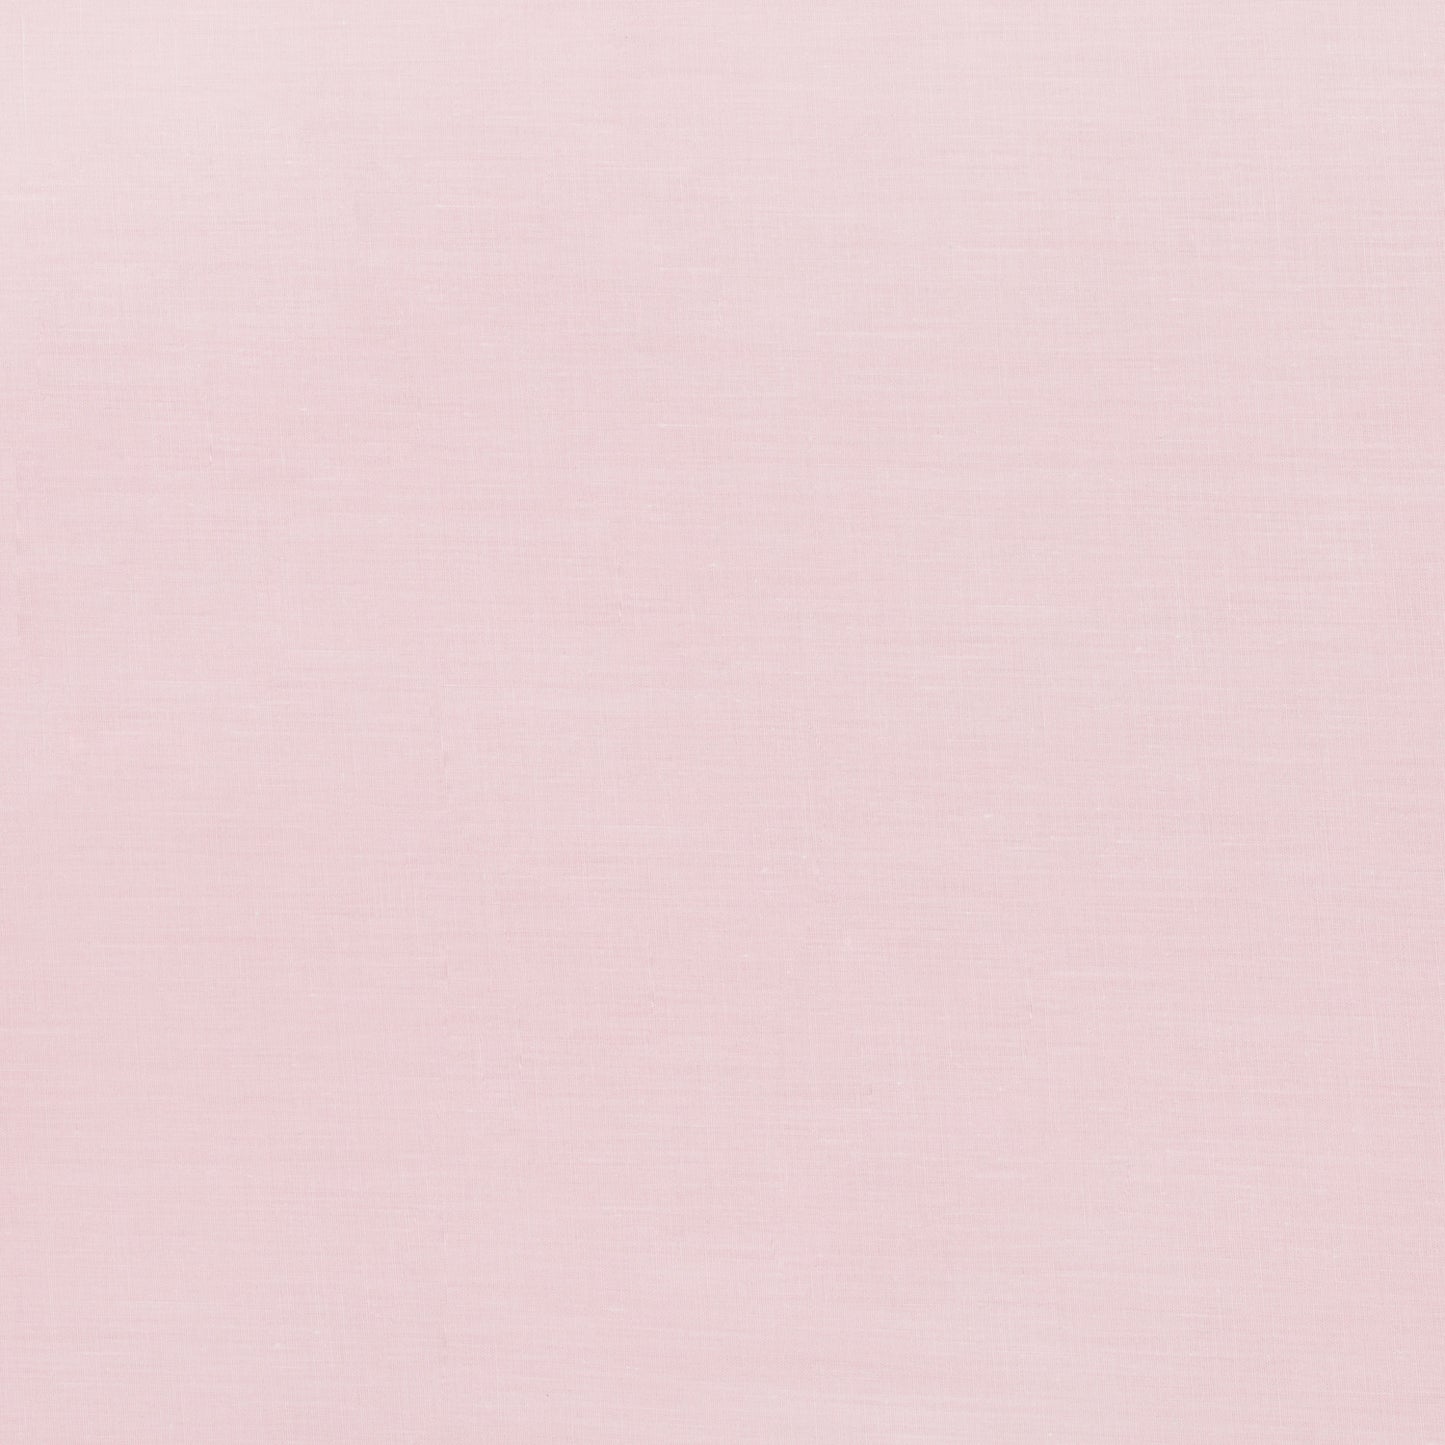 Sheeting Poly Cotton Baby Pink #3 240cm